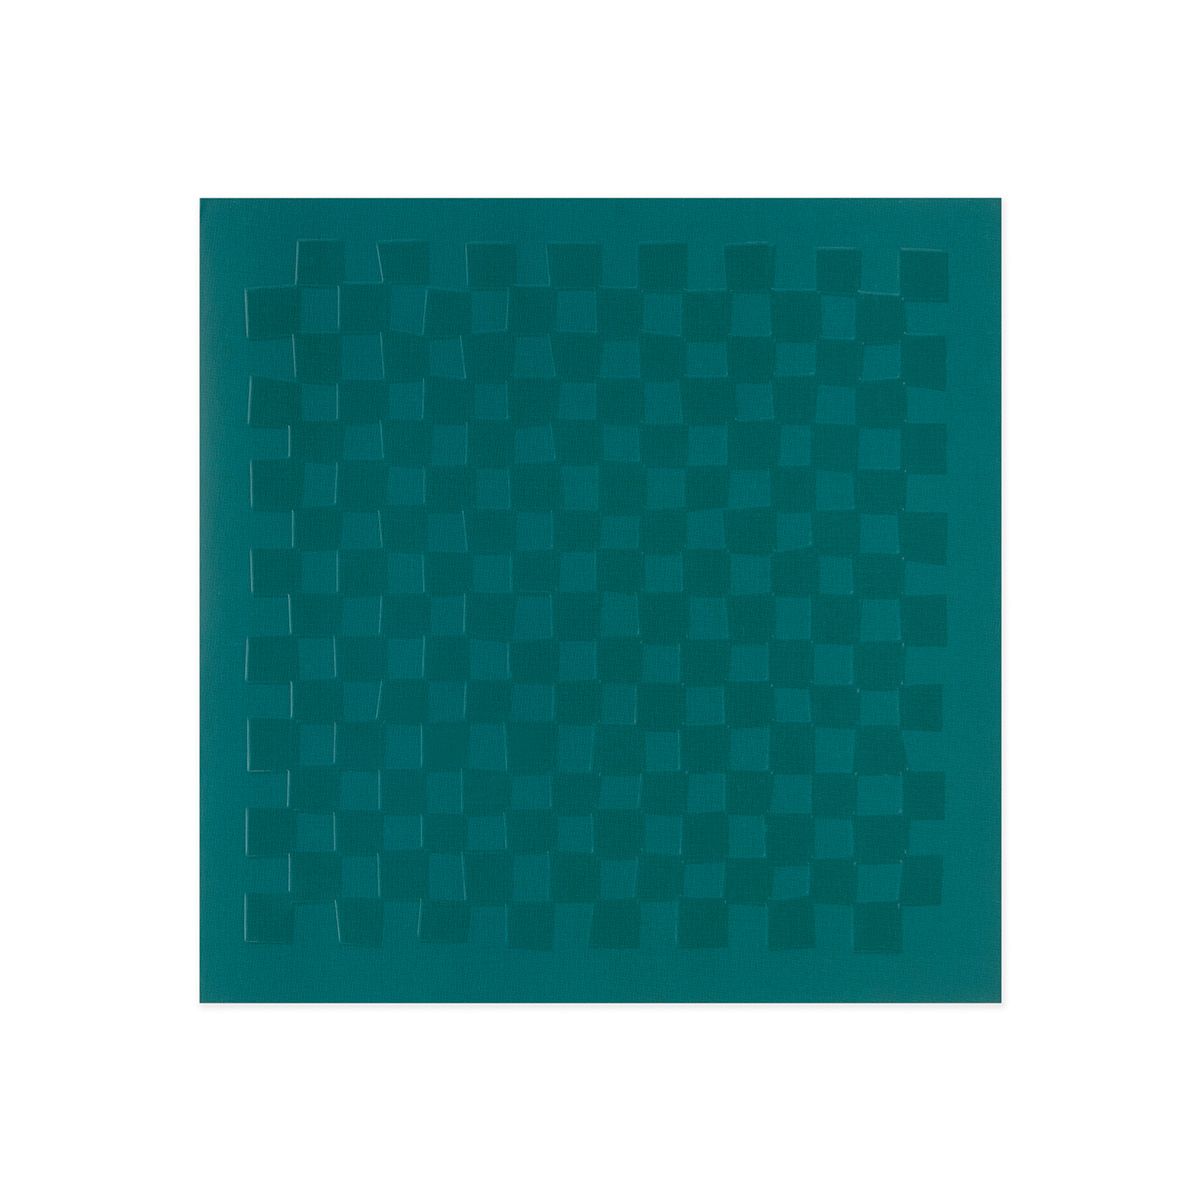 Greeting Card CHEQUERED GREEN Ordning and Reda